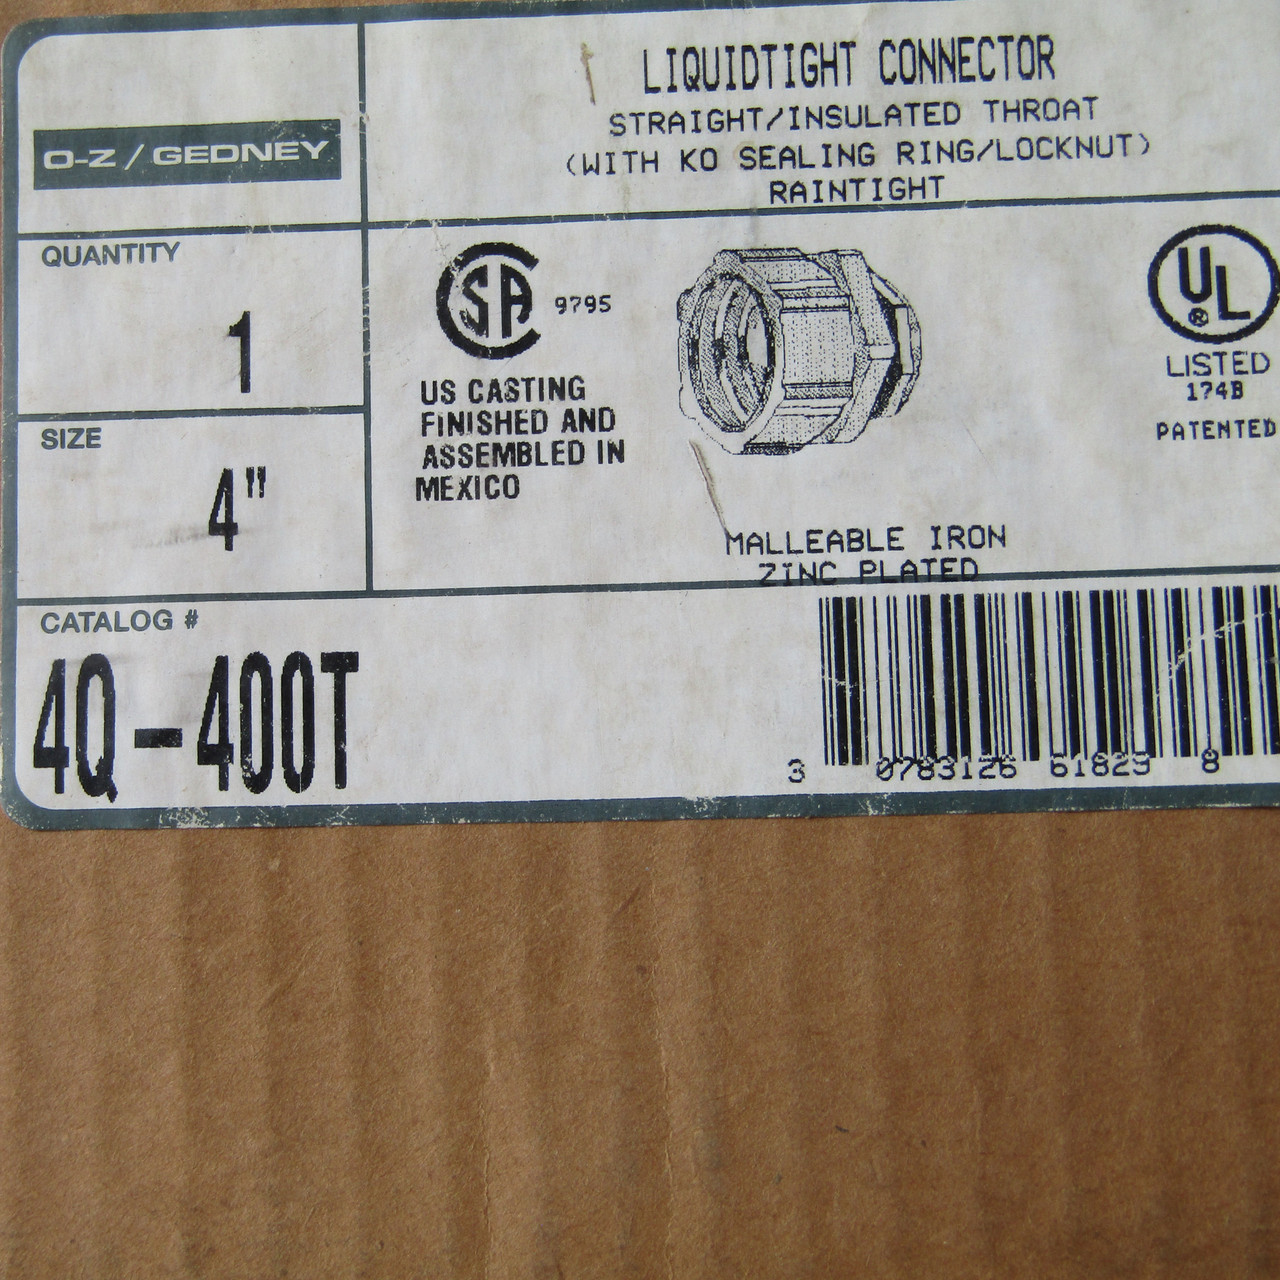 Oz Gedney 4Q-400T 4" Liquidtight Straight/Insulated Throat Connector - New